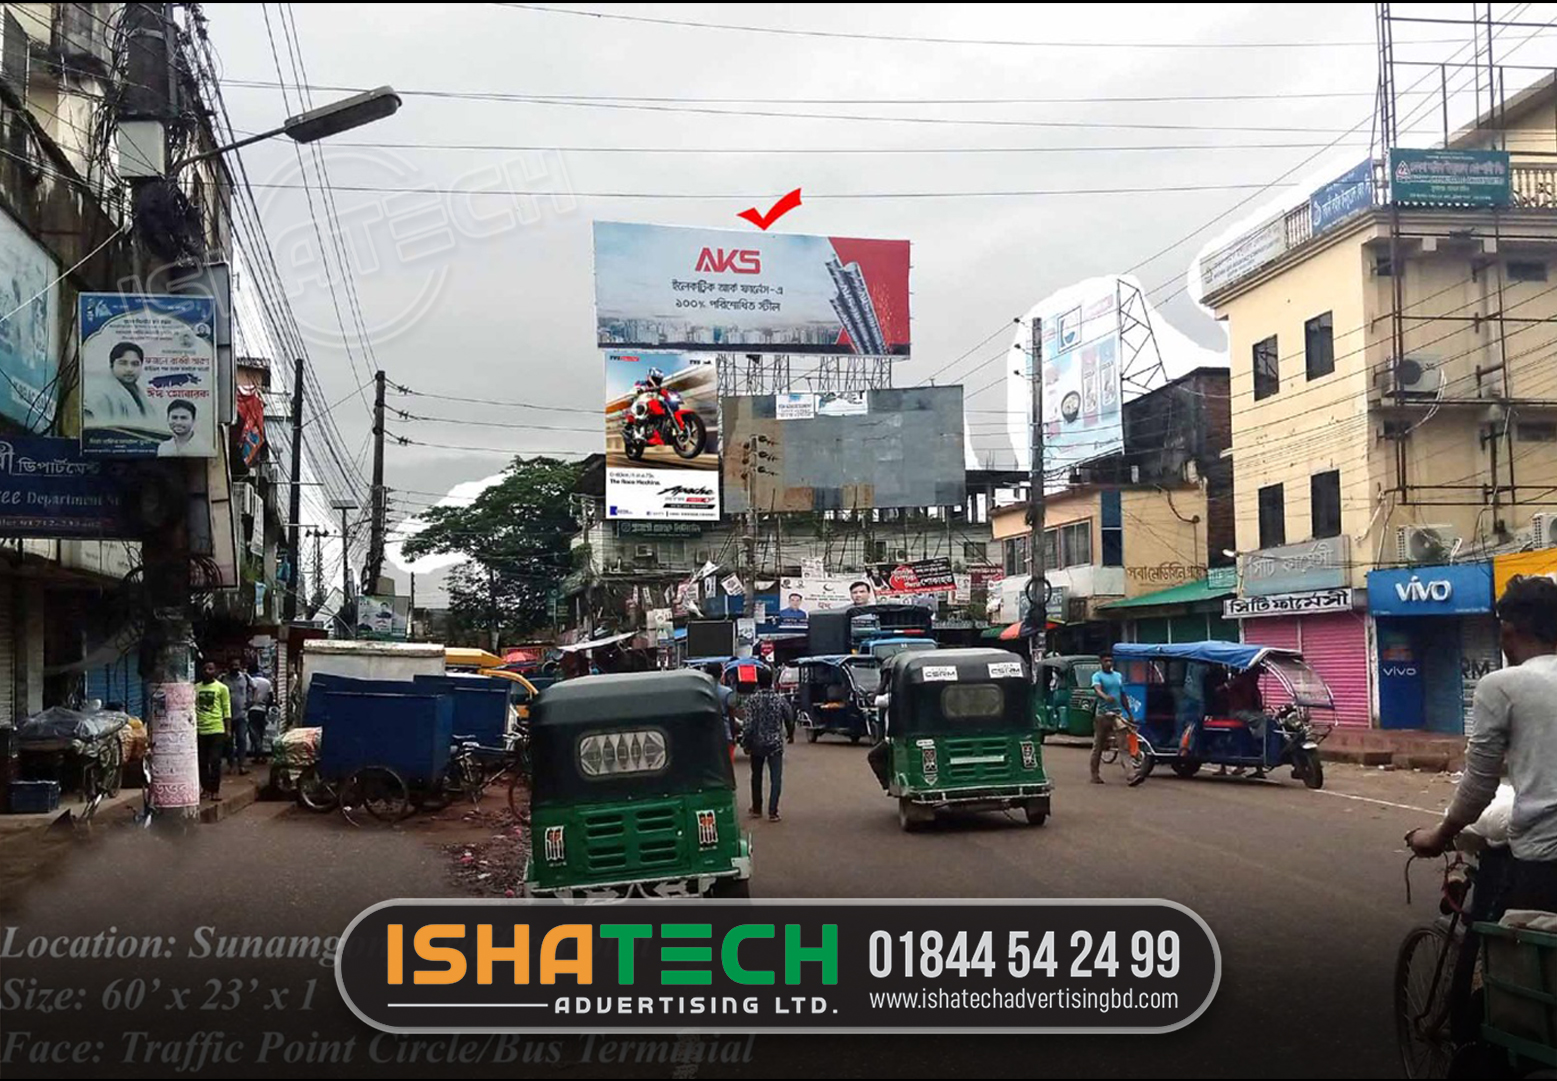 Billboard advertising involves displaying large-format advertisements on prominent outdoor structures, such as billboards, digital screens,